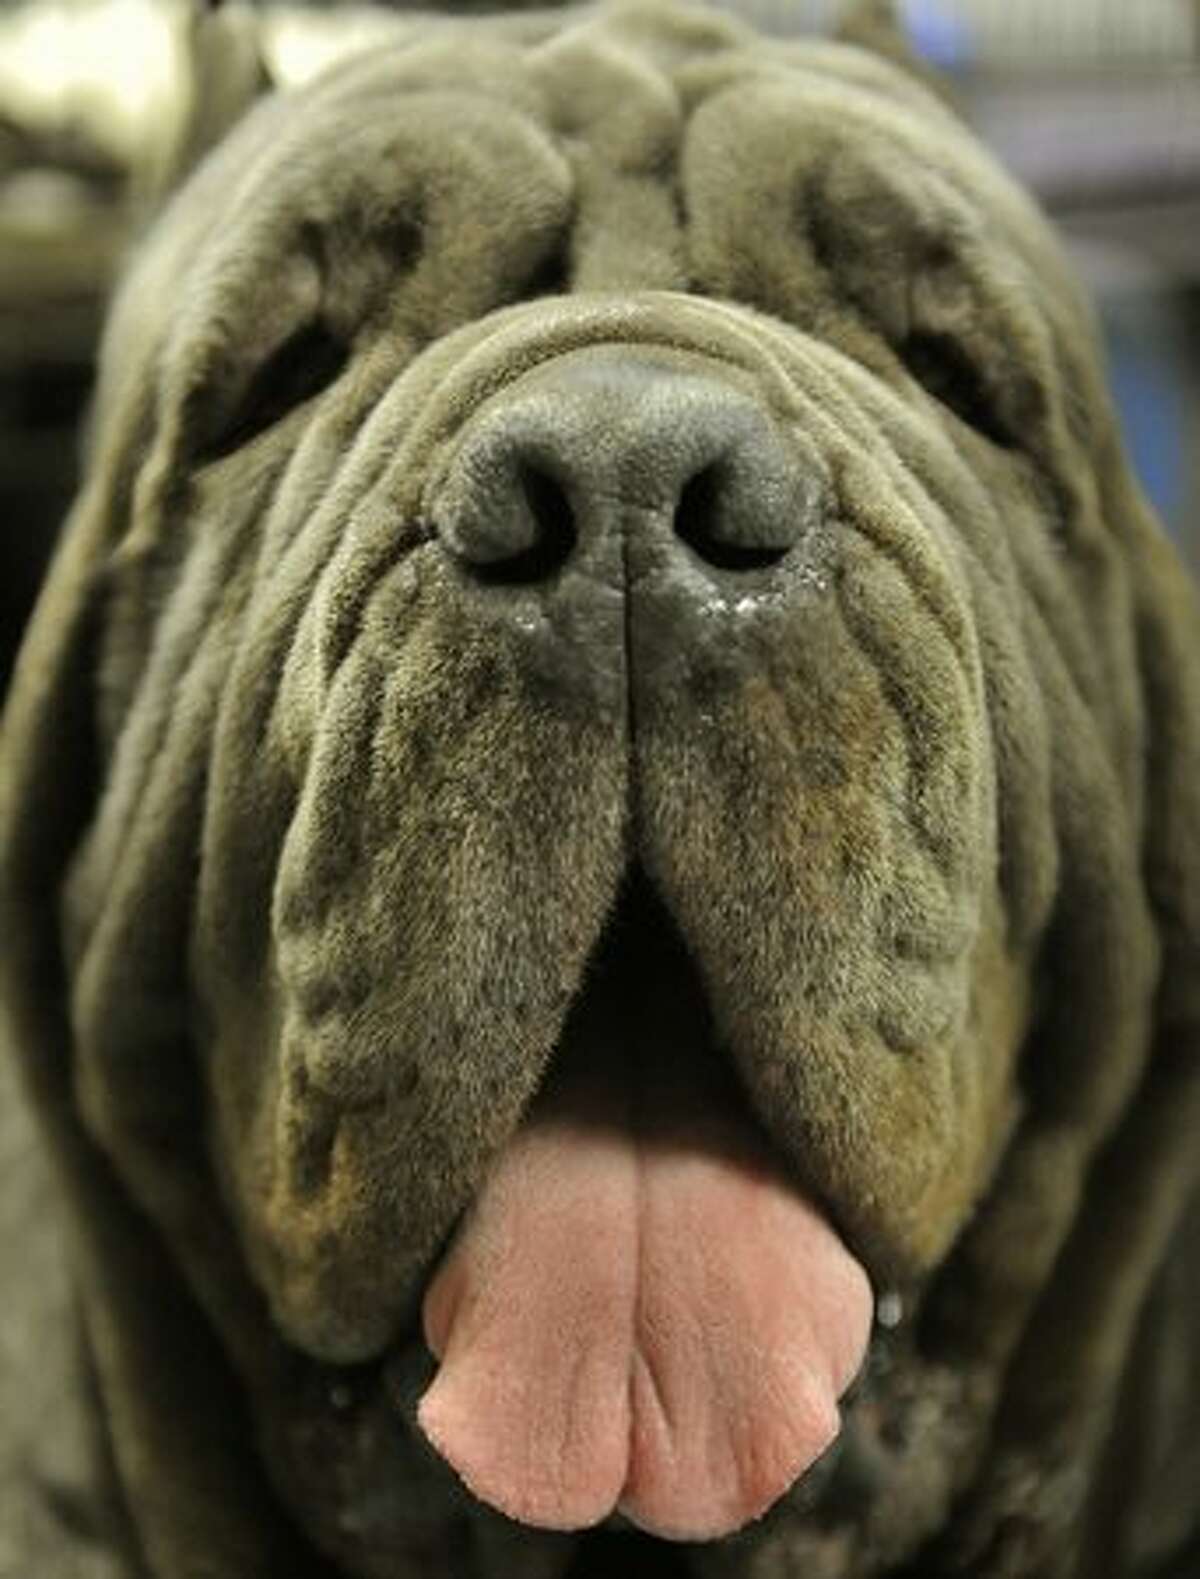 Bubba, a Neopolitan Mastiff, poses during the final day of the 134th Westminster Kennel Club Dog Show at Madison Square Garden in New York, February 16, 2010. The country's premier dog show runs for two days with the Best in Show picked tonight.